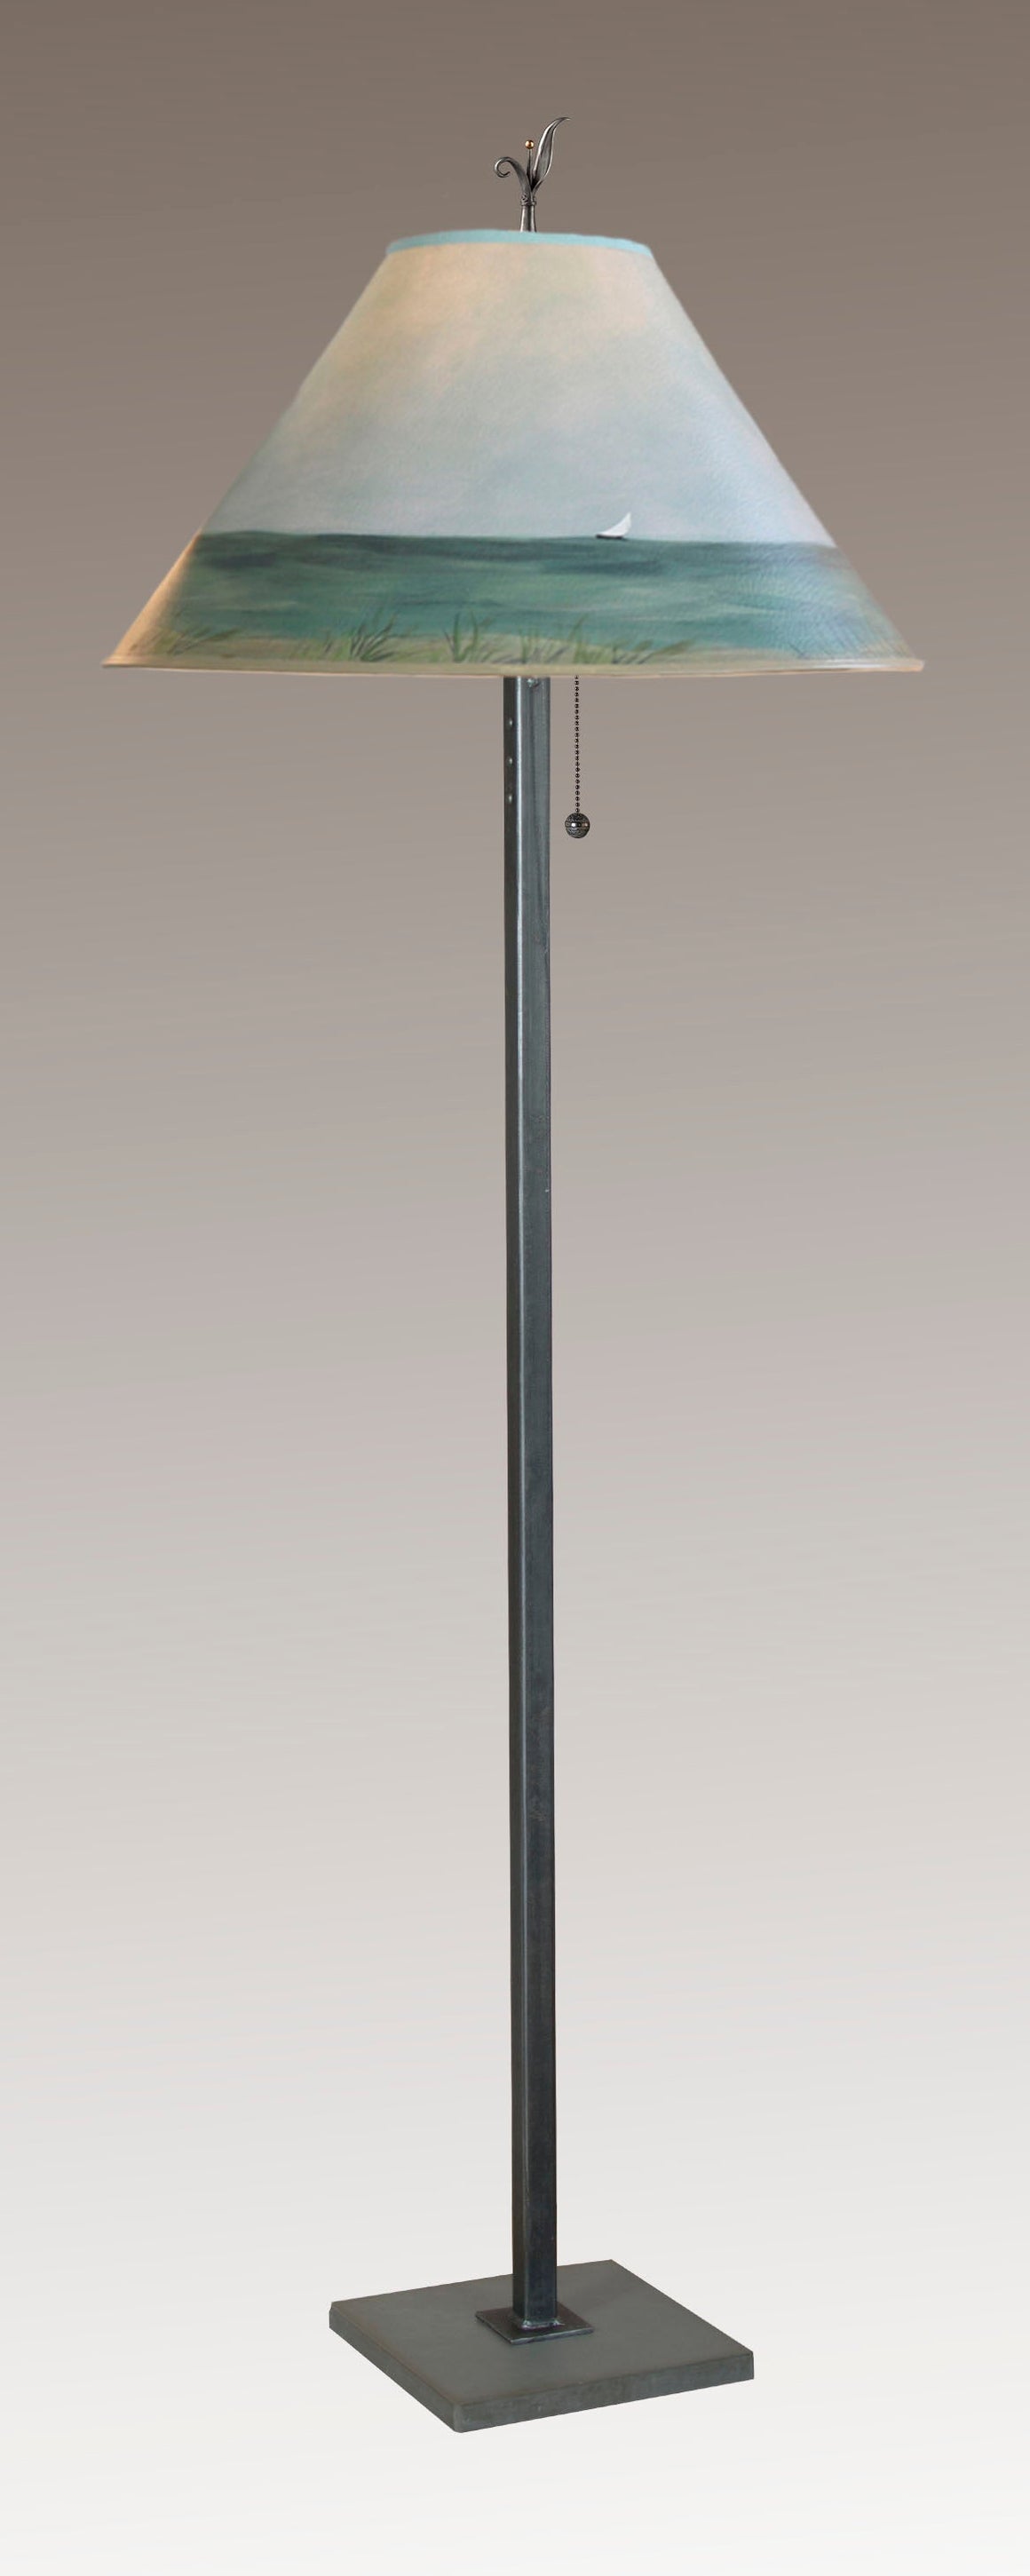 Steel Floor Lamp with Large Conical Shade in Shore